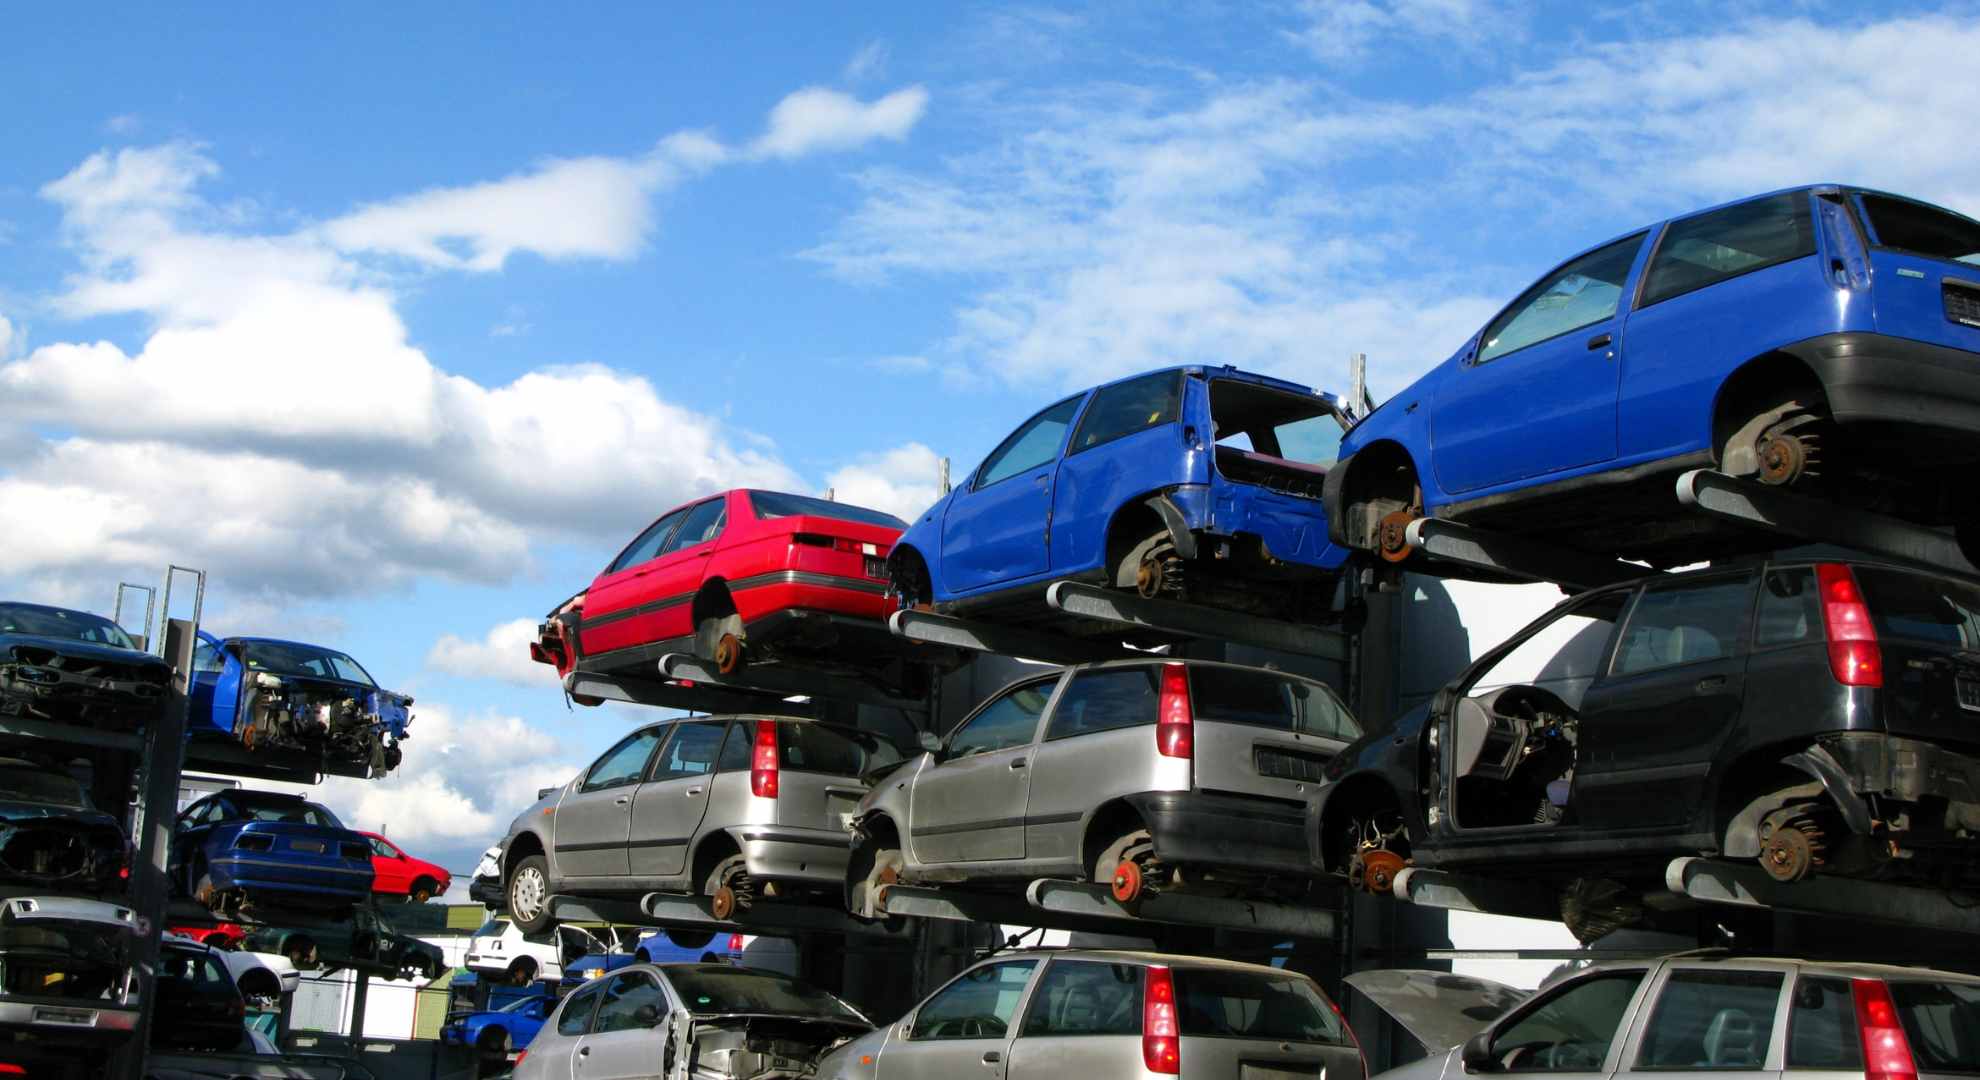 Cash + For + Car + Removals + Melbourne + Free + Car + Removal + Service + & Best + Cash + For + Cars + Melbourne + Company+car removal 13